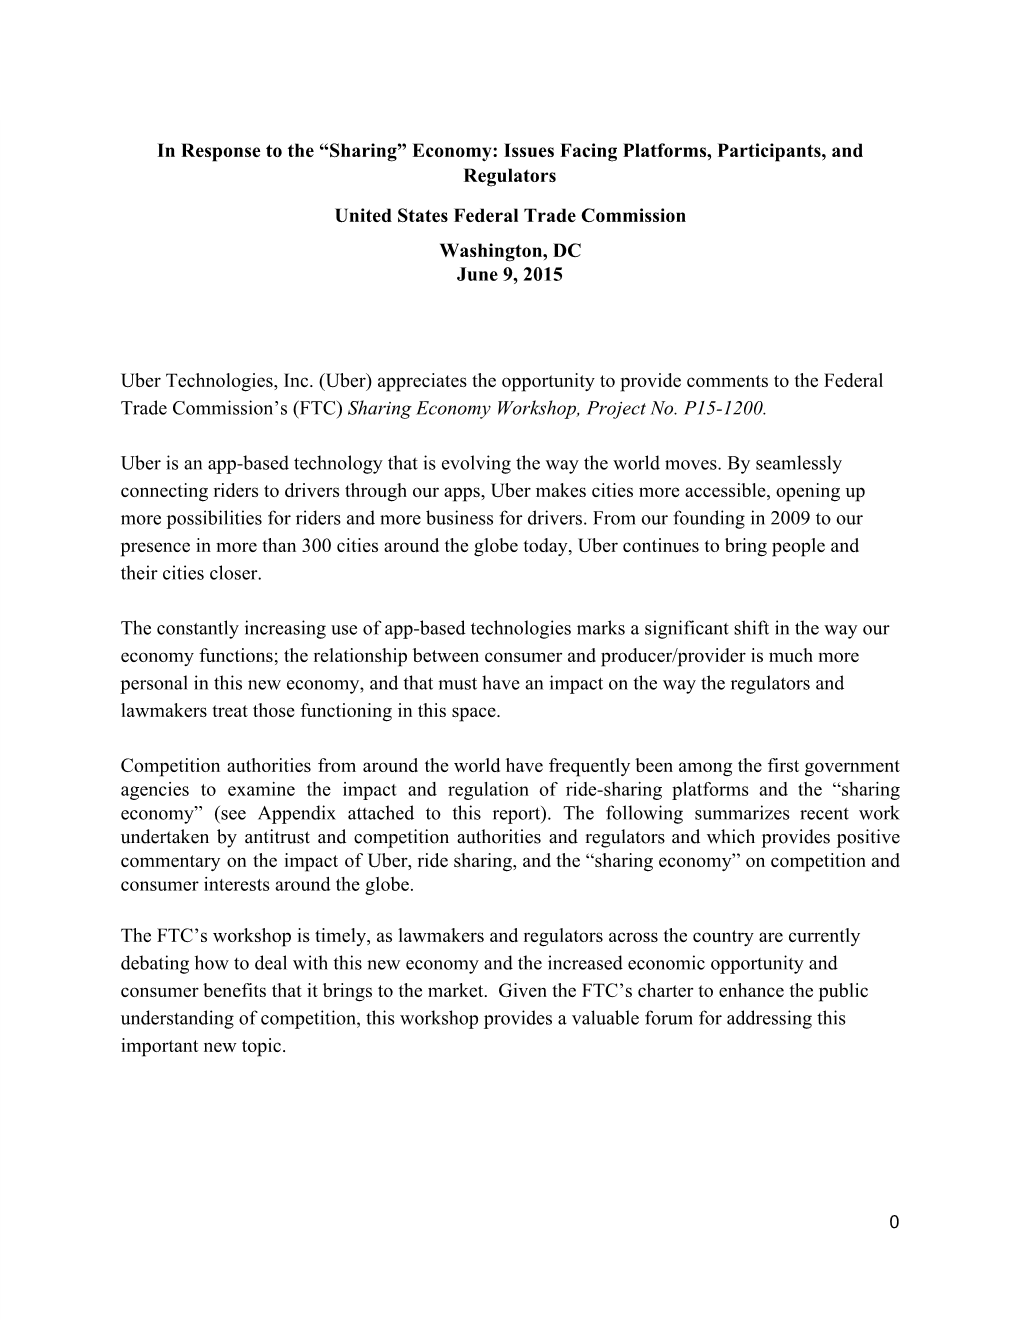 In Response to the “Sharing” Economy: Issues Facing Platforms, Participants, and Regulators United States Federal Trade Commission Washington, DC June 9, 2015